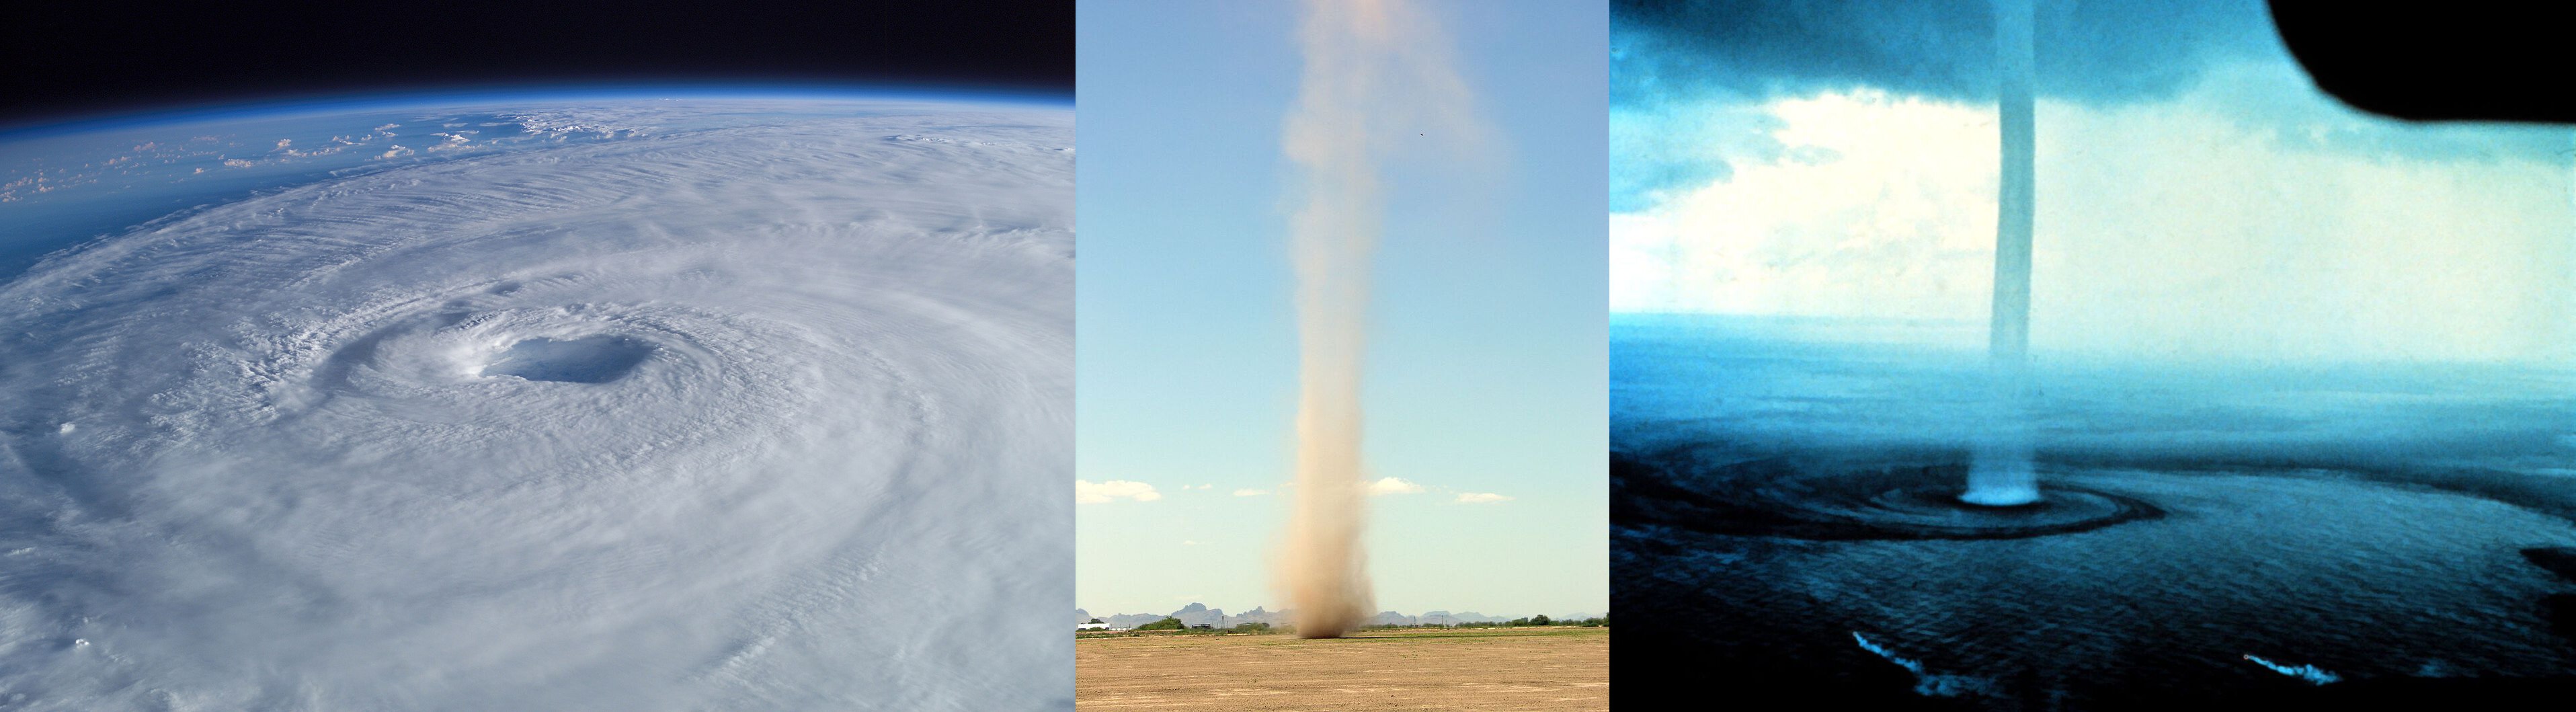 Cylindrical atmospheric vortices - tropical cyclone, dust devil, and waterspout (Creative commons; NASA and Sinclair).